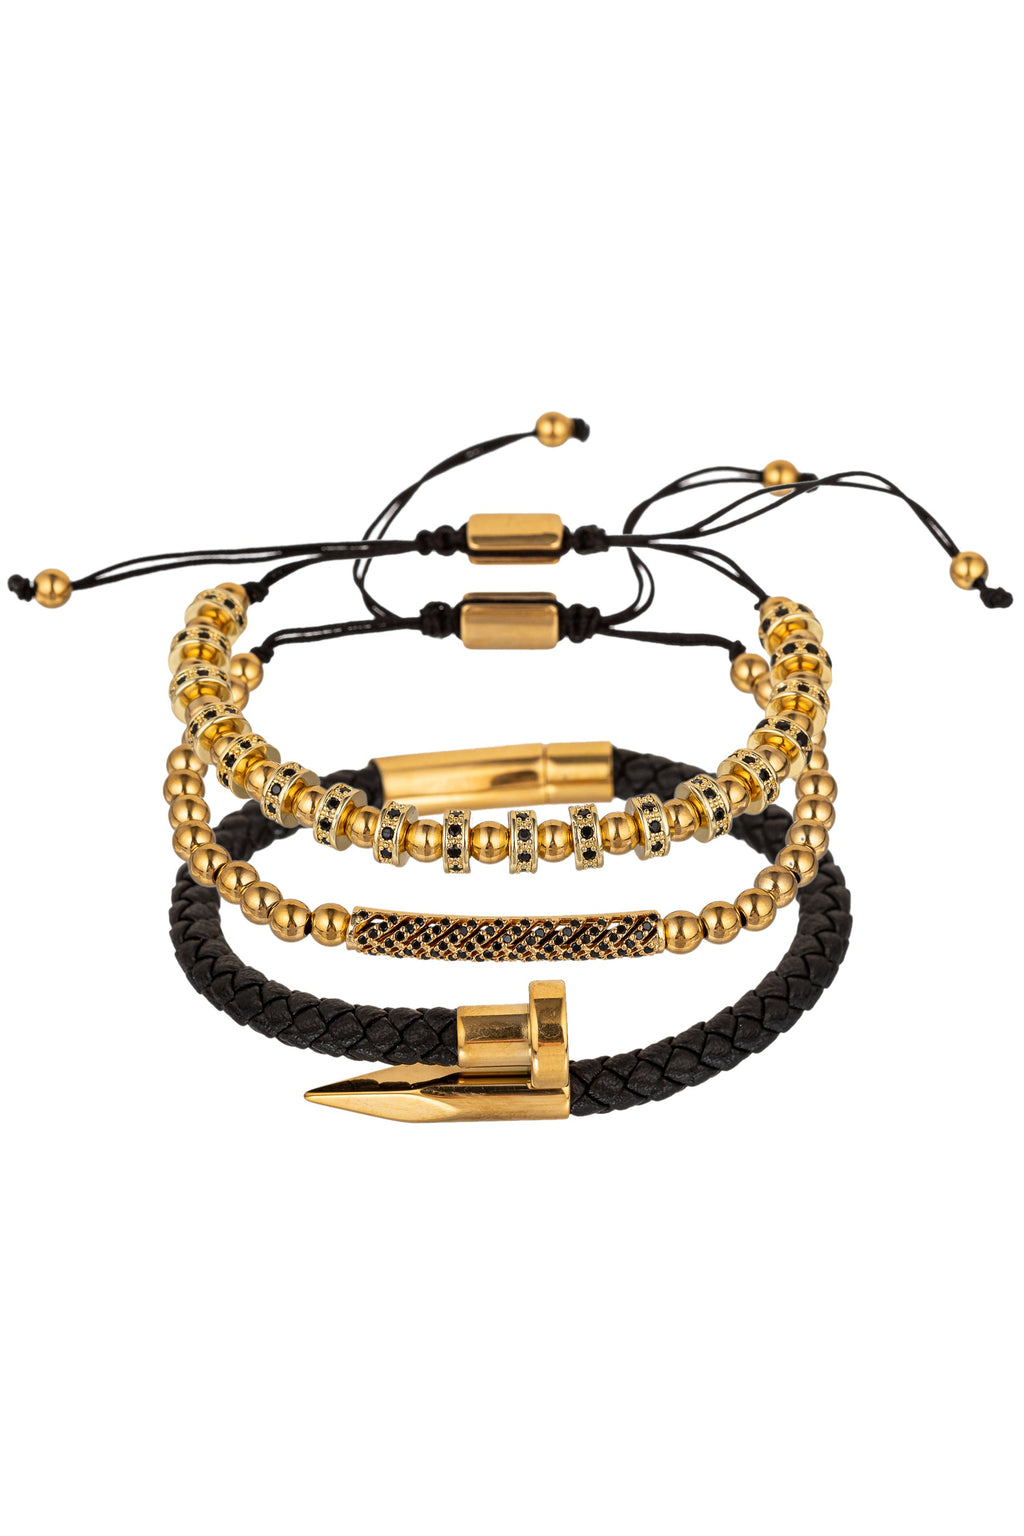 Solomun 3 Piece Leather and Brass Beaded Bracelet Set: Elevate Your Wrist Game with Style and Elegance.